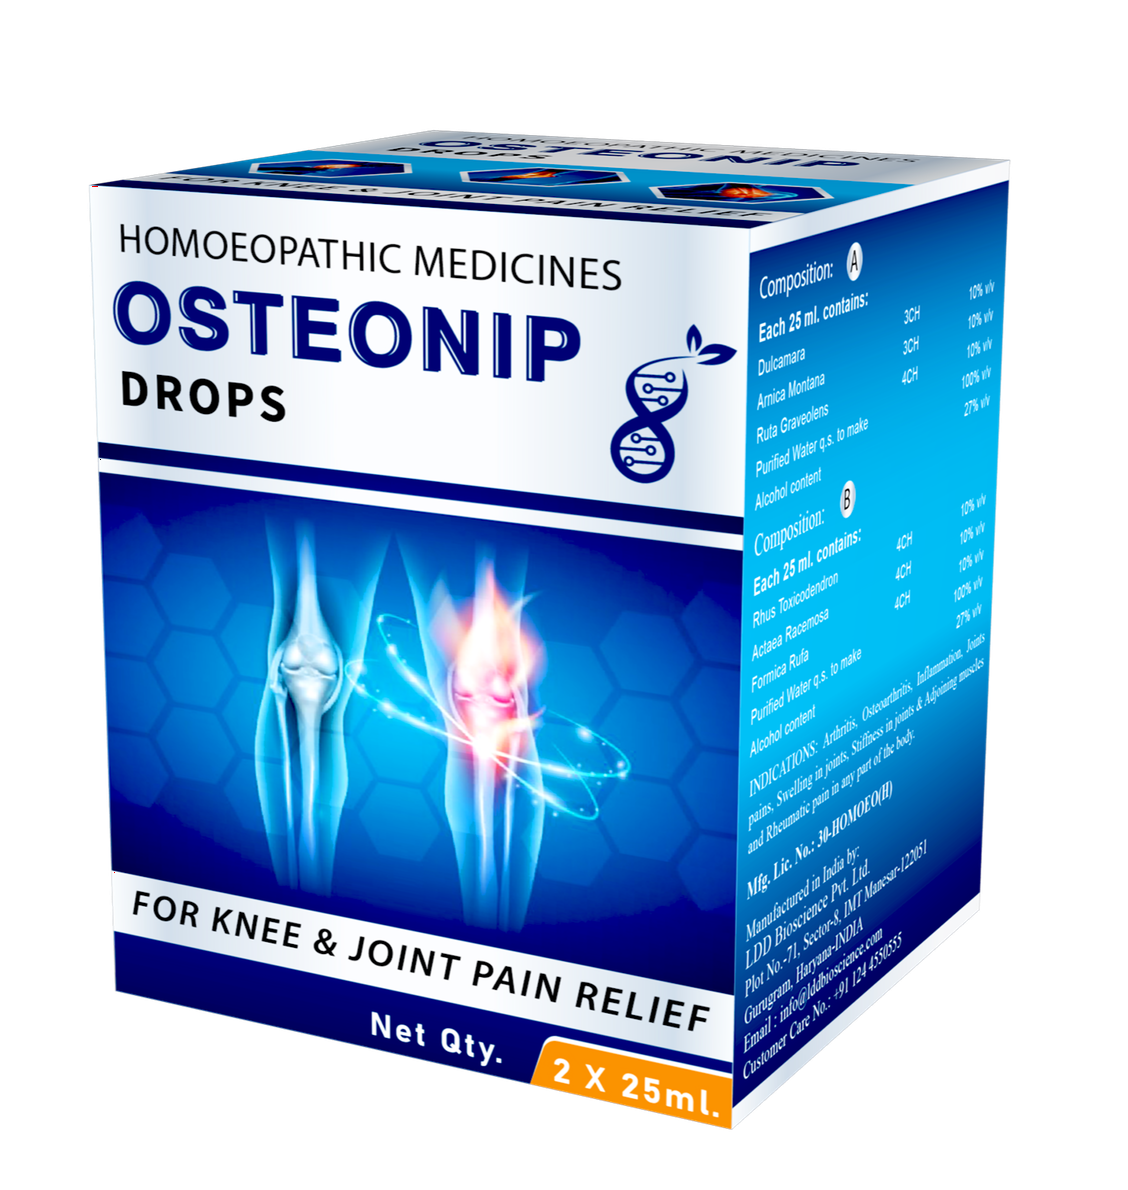 LDD Bioscience Osteonip Drops For Knee & joint pain relief